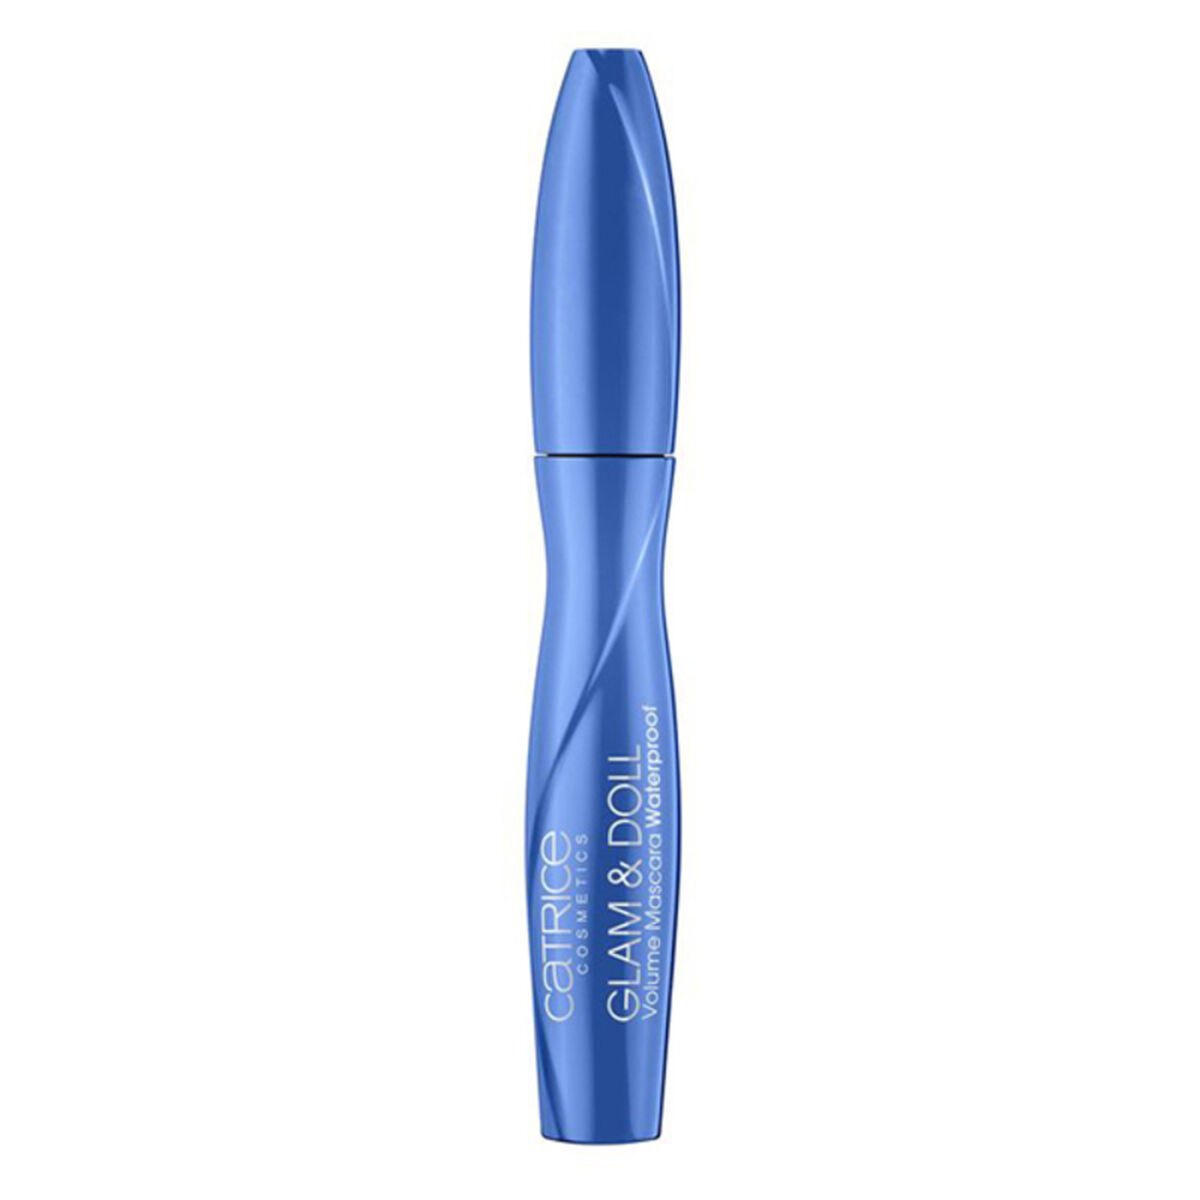 Mascara pour les cils effet volume Catrice Glamour and Doll Nº 010 Ultra black 10 ml